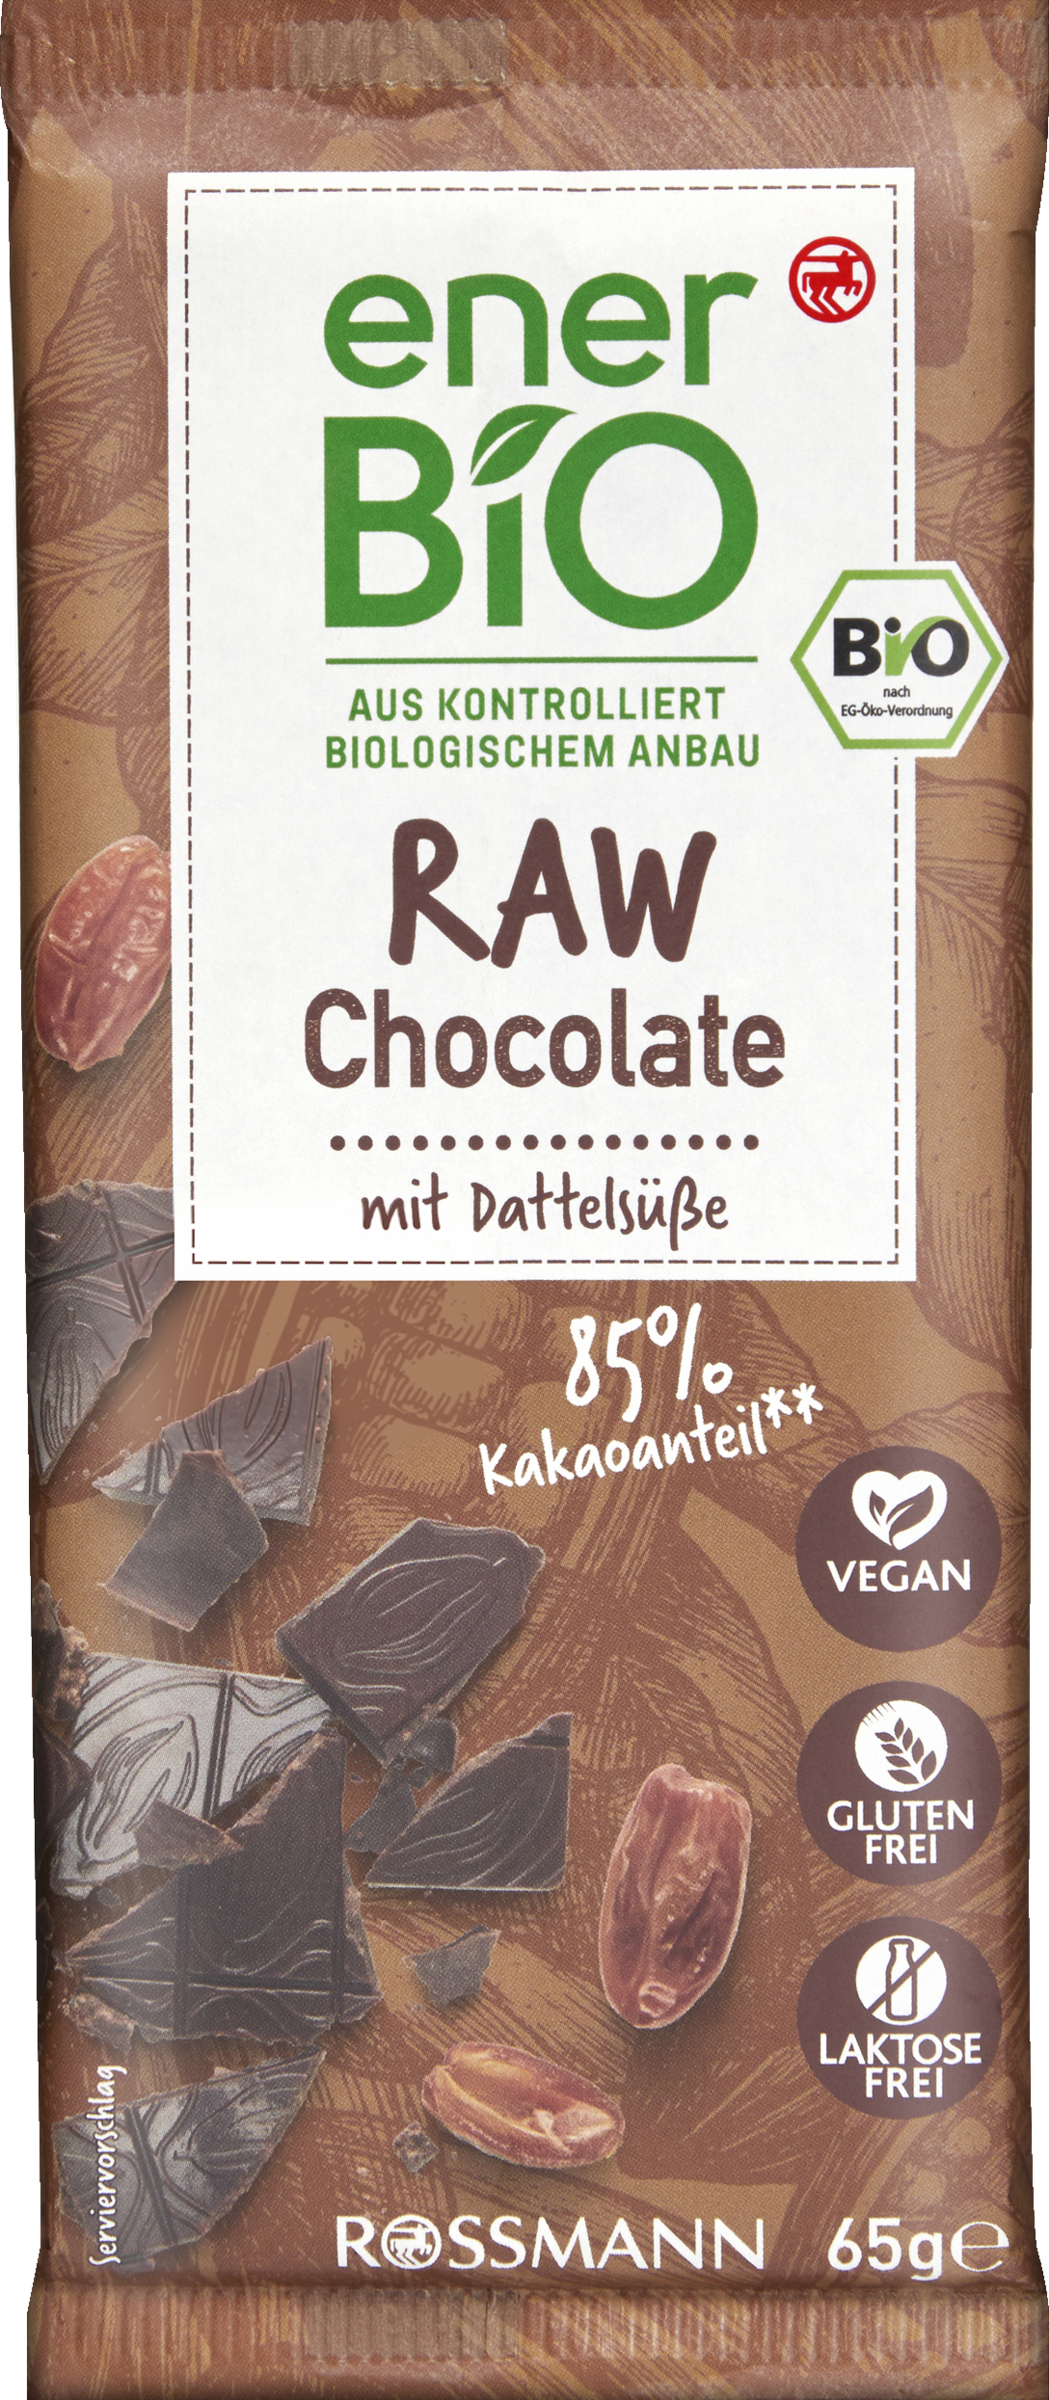 enerBiO RAW Chocolate with date sweetener 85% cocoa content